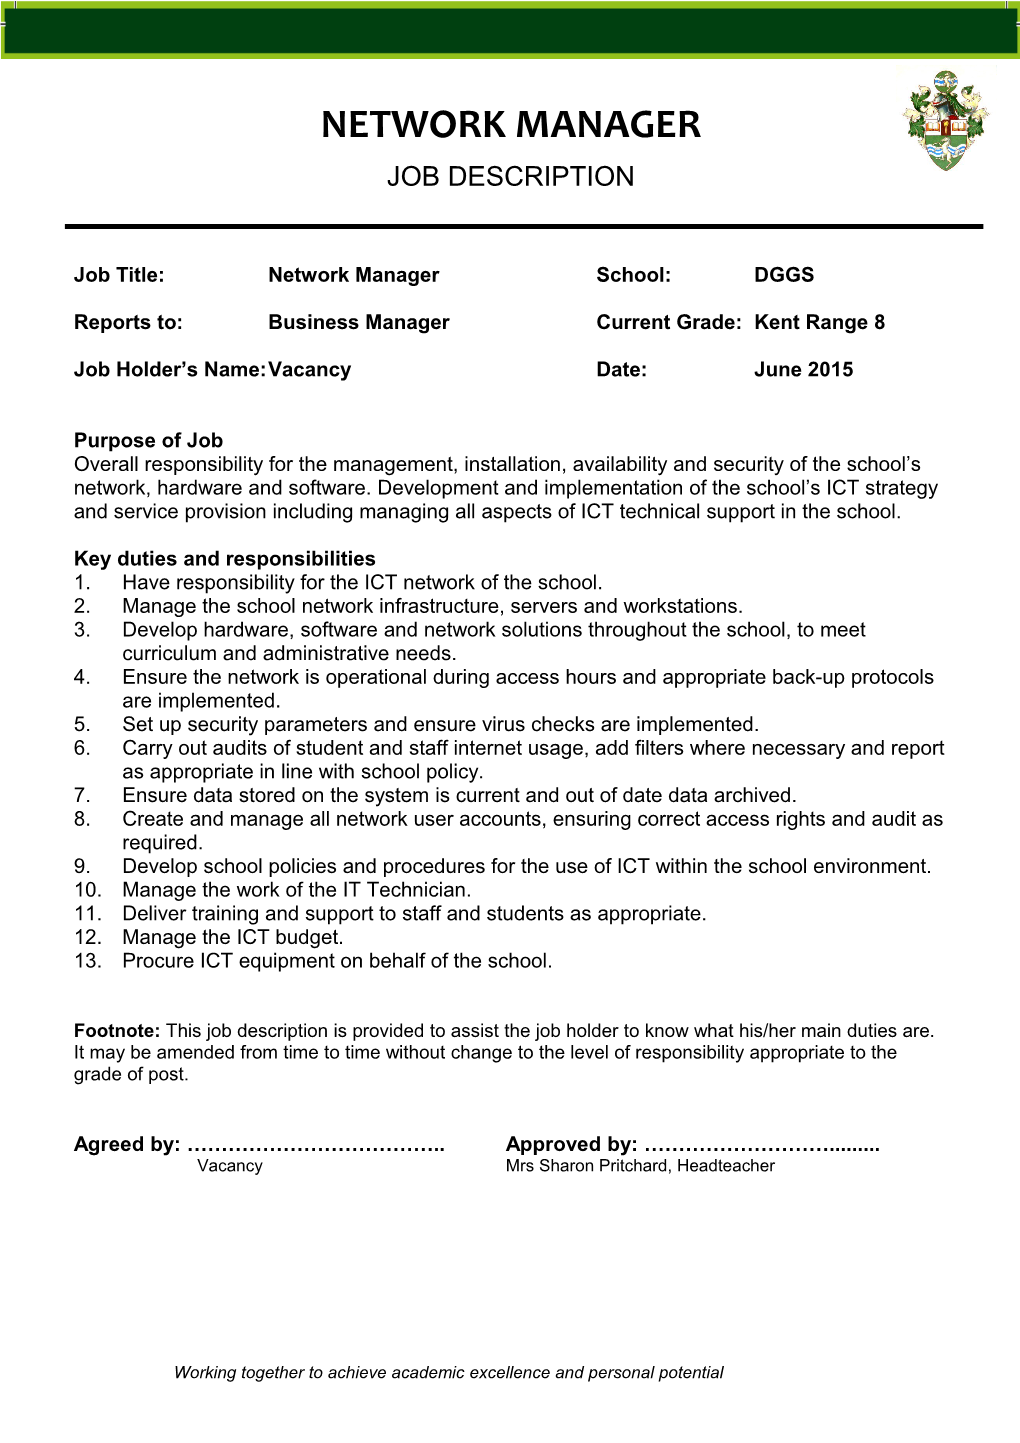 Benchmarked Jobs for Schools: Network Manager